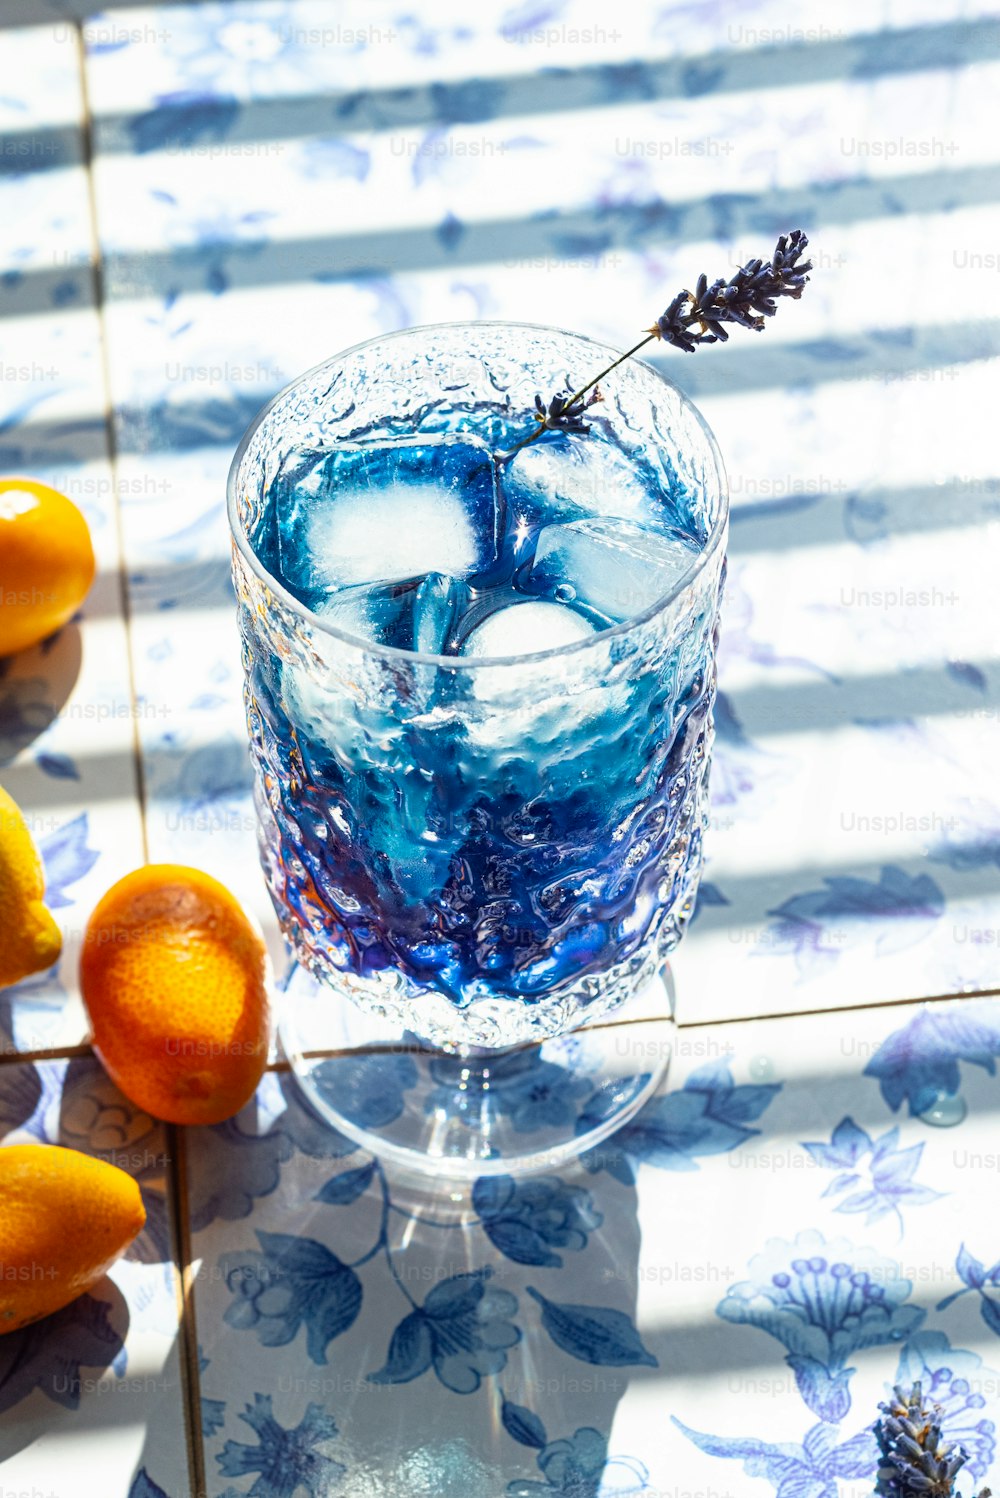 a glass filled with blue liquid next to oranges